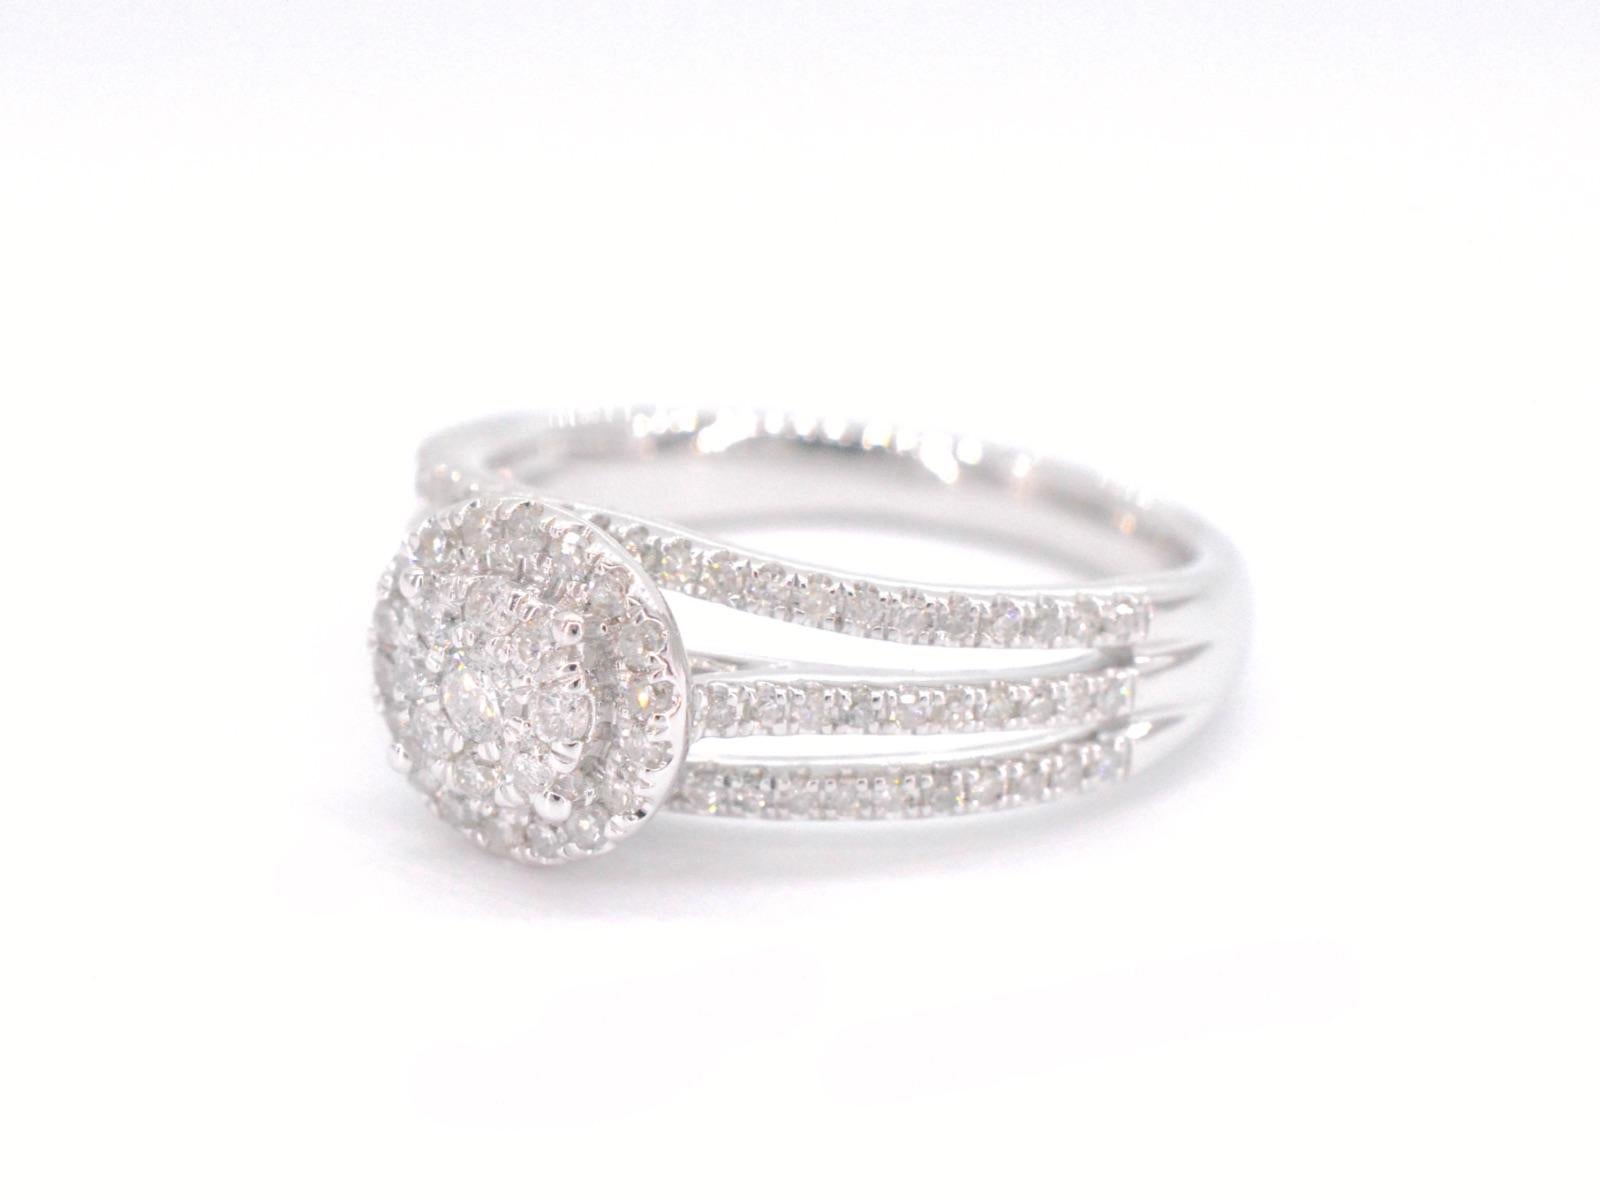 The white gold entourage ring with Diamonds is a stunning piece of jewelry that is sure to make a statement. Made from white gold, this ring features brilliant-cut diamonds that are arranged in a classic entourage style, with a center diamond